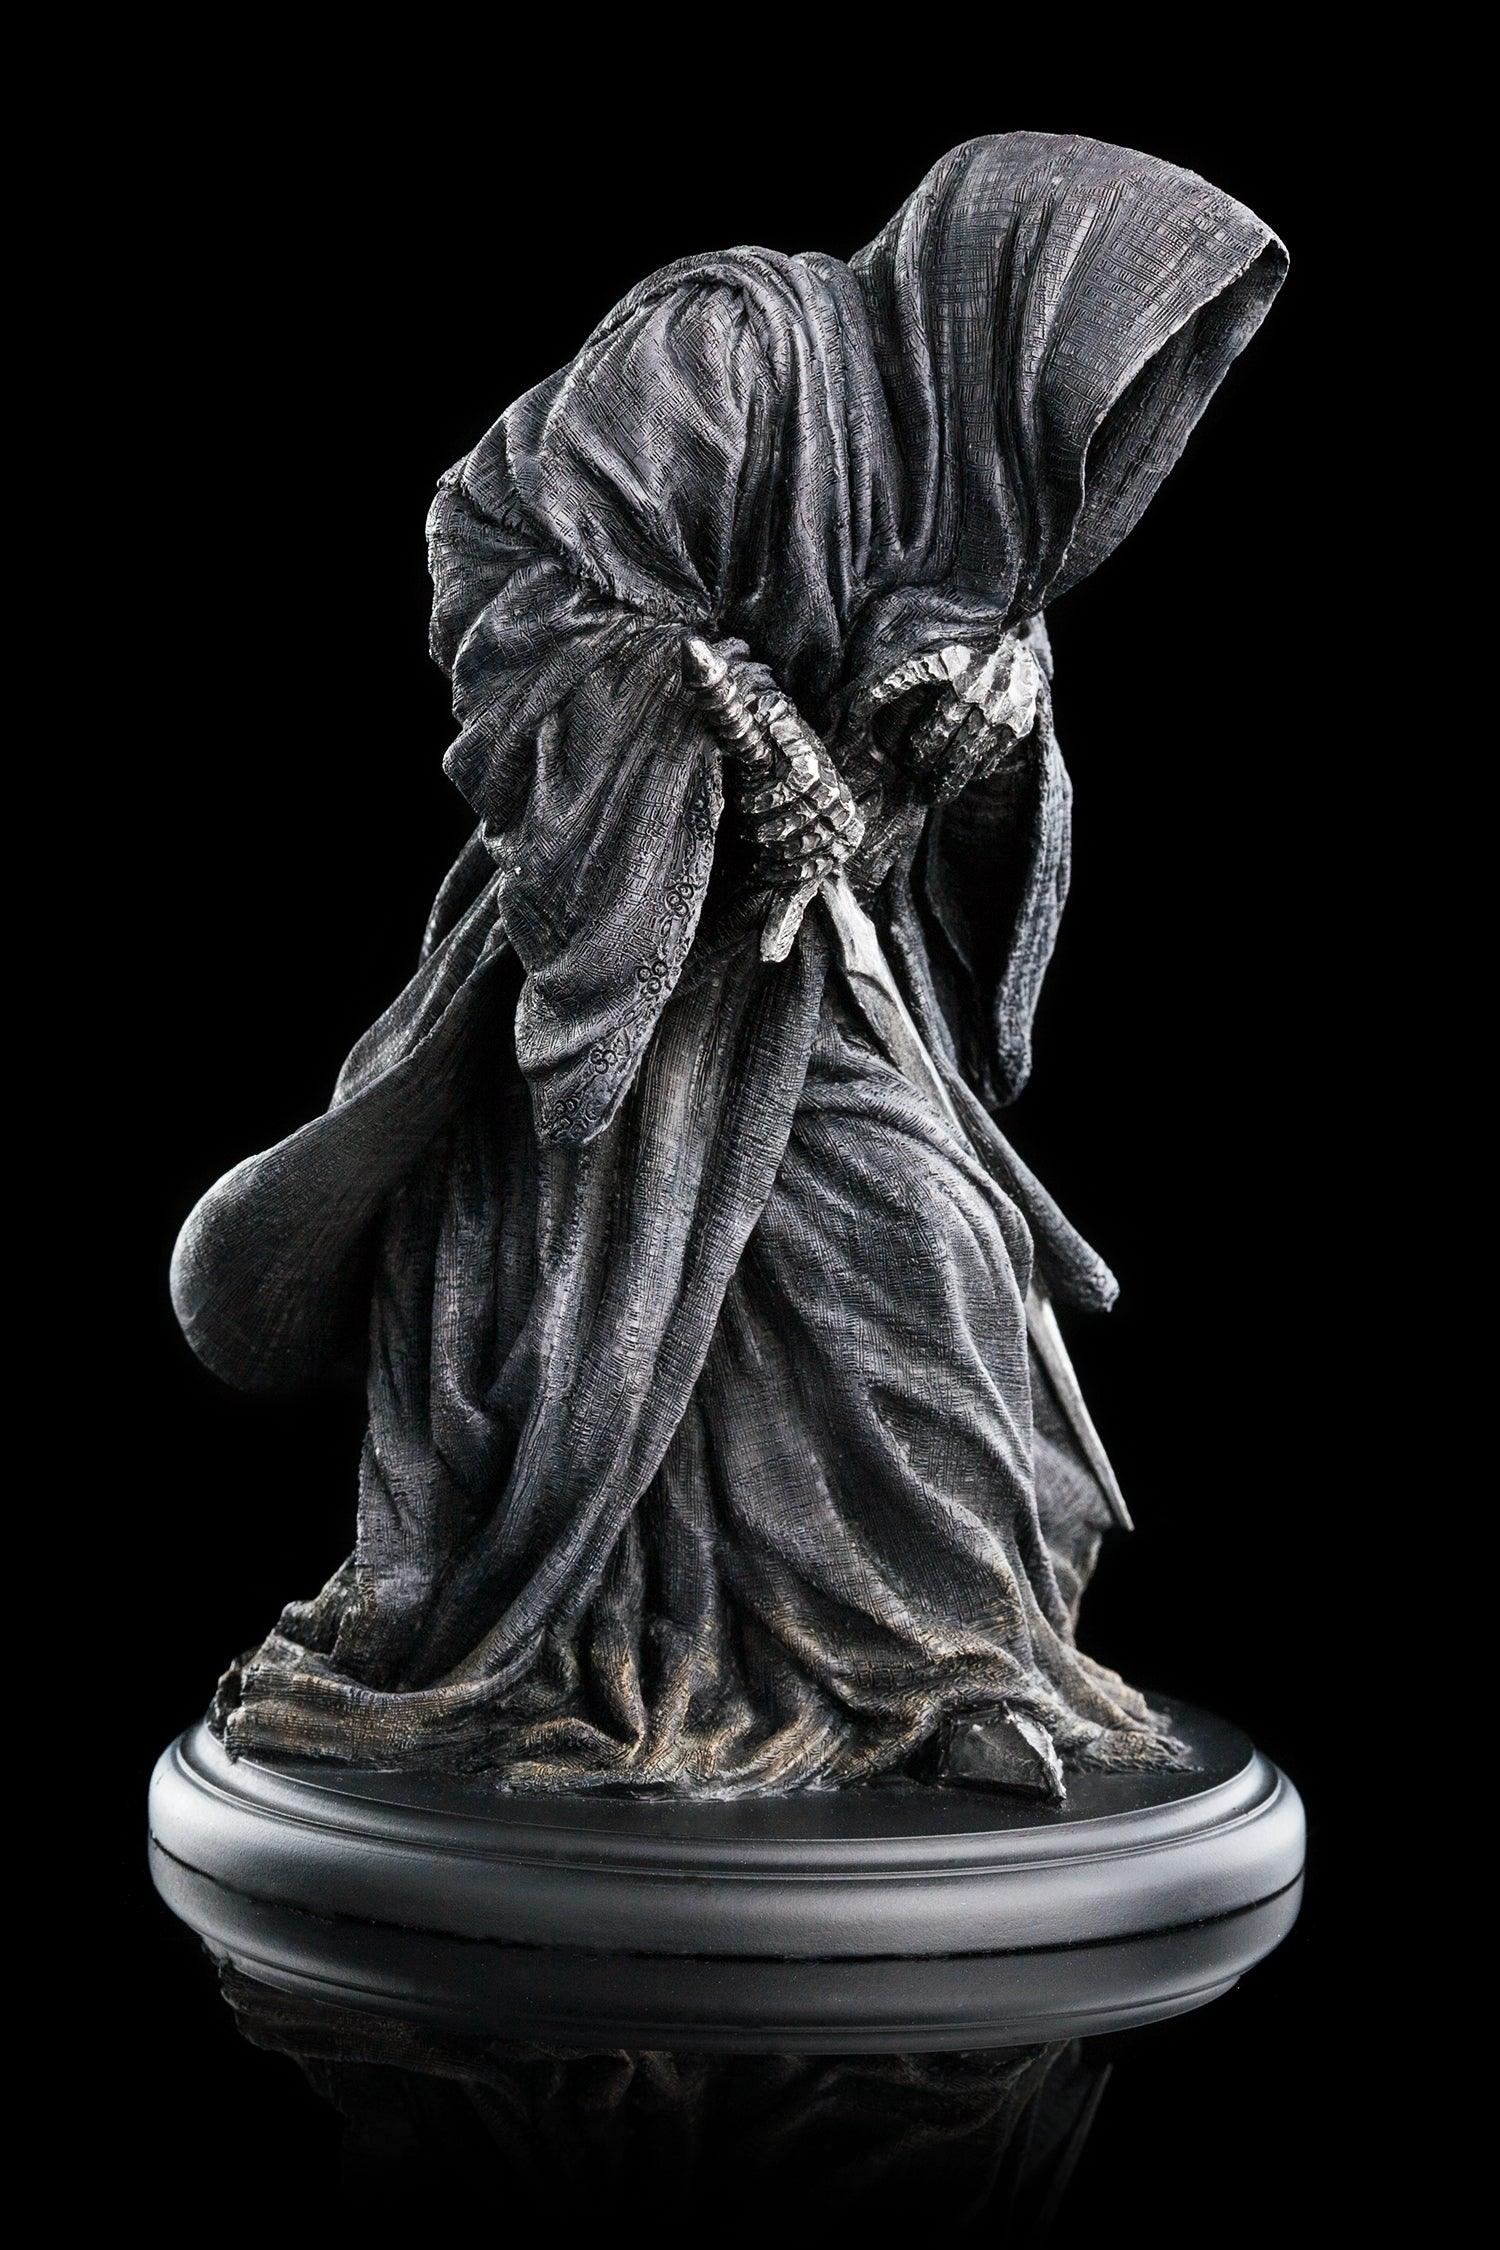 The Lord of the Rings - Ringwraith Miniature Statue Weta Titan Pop Culture